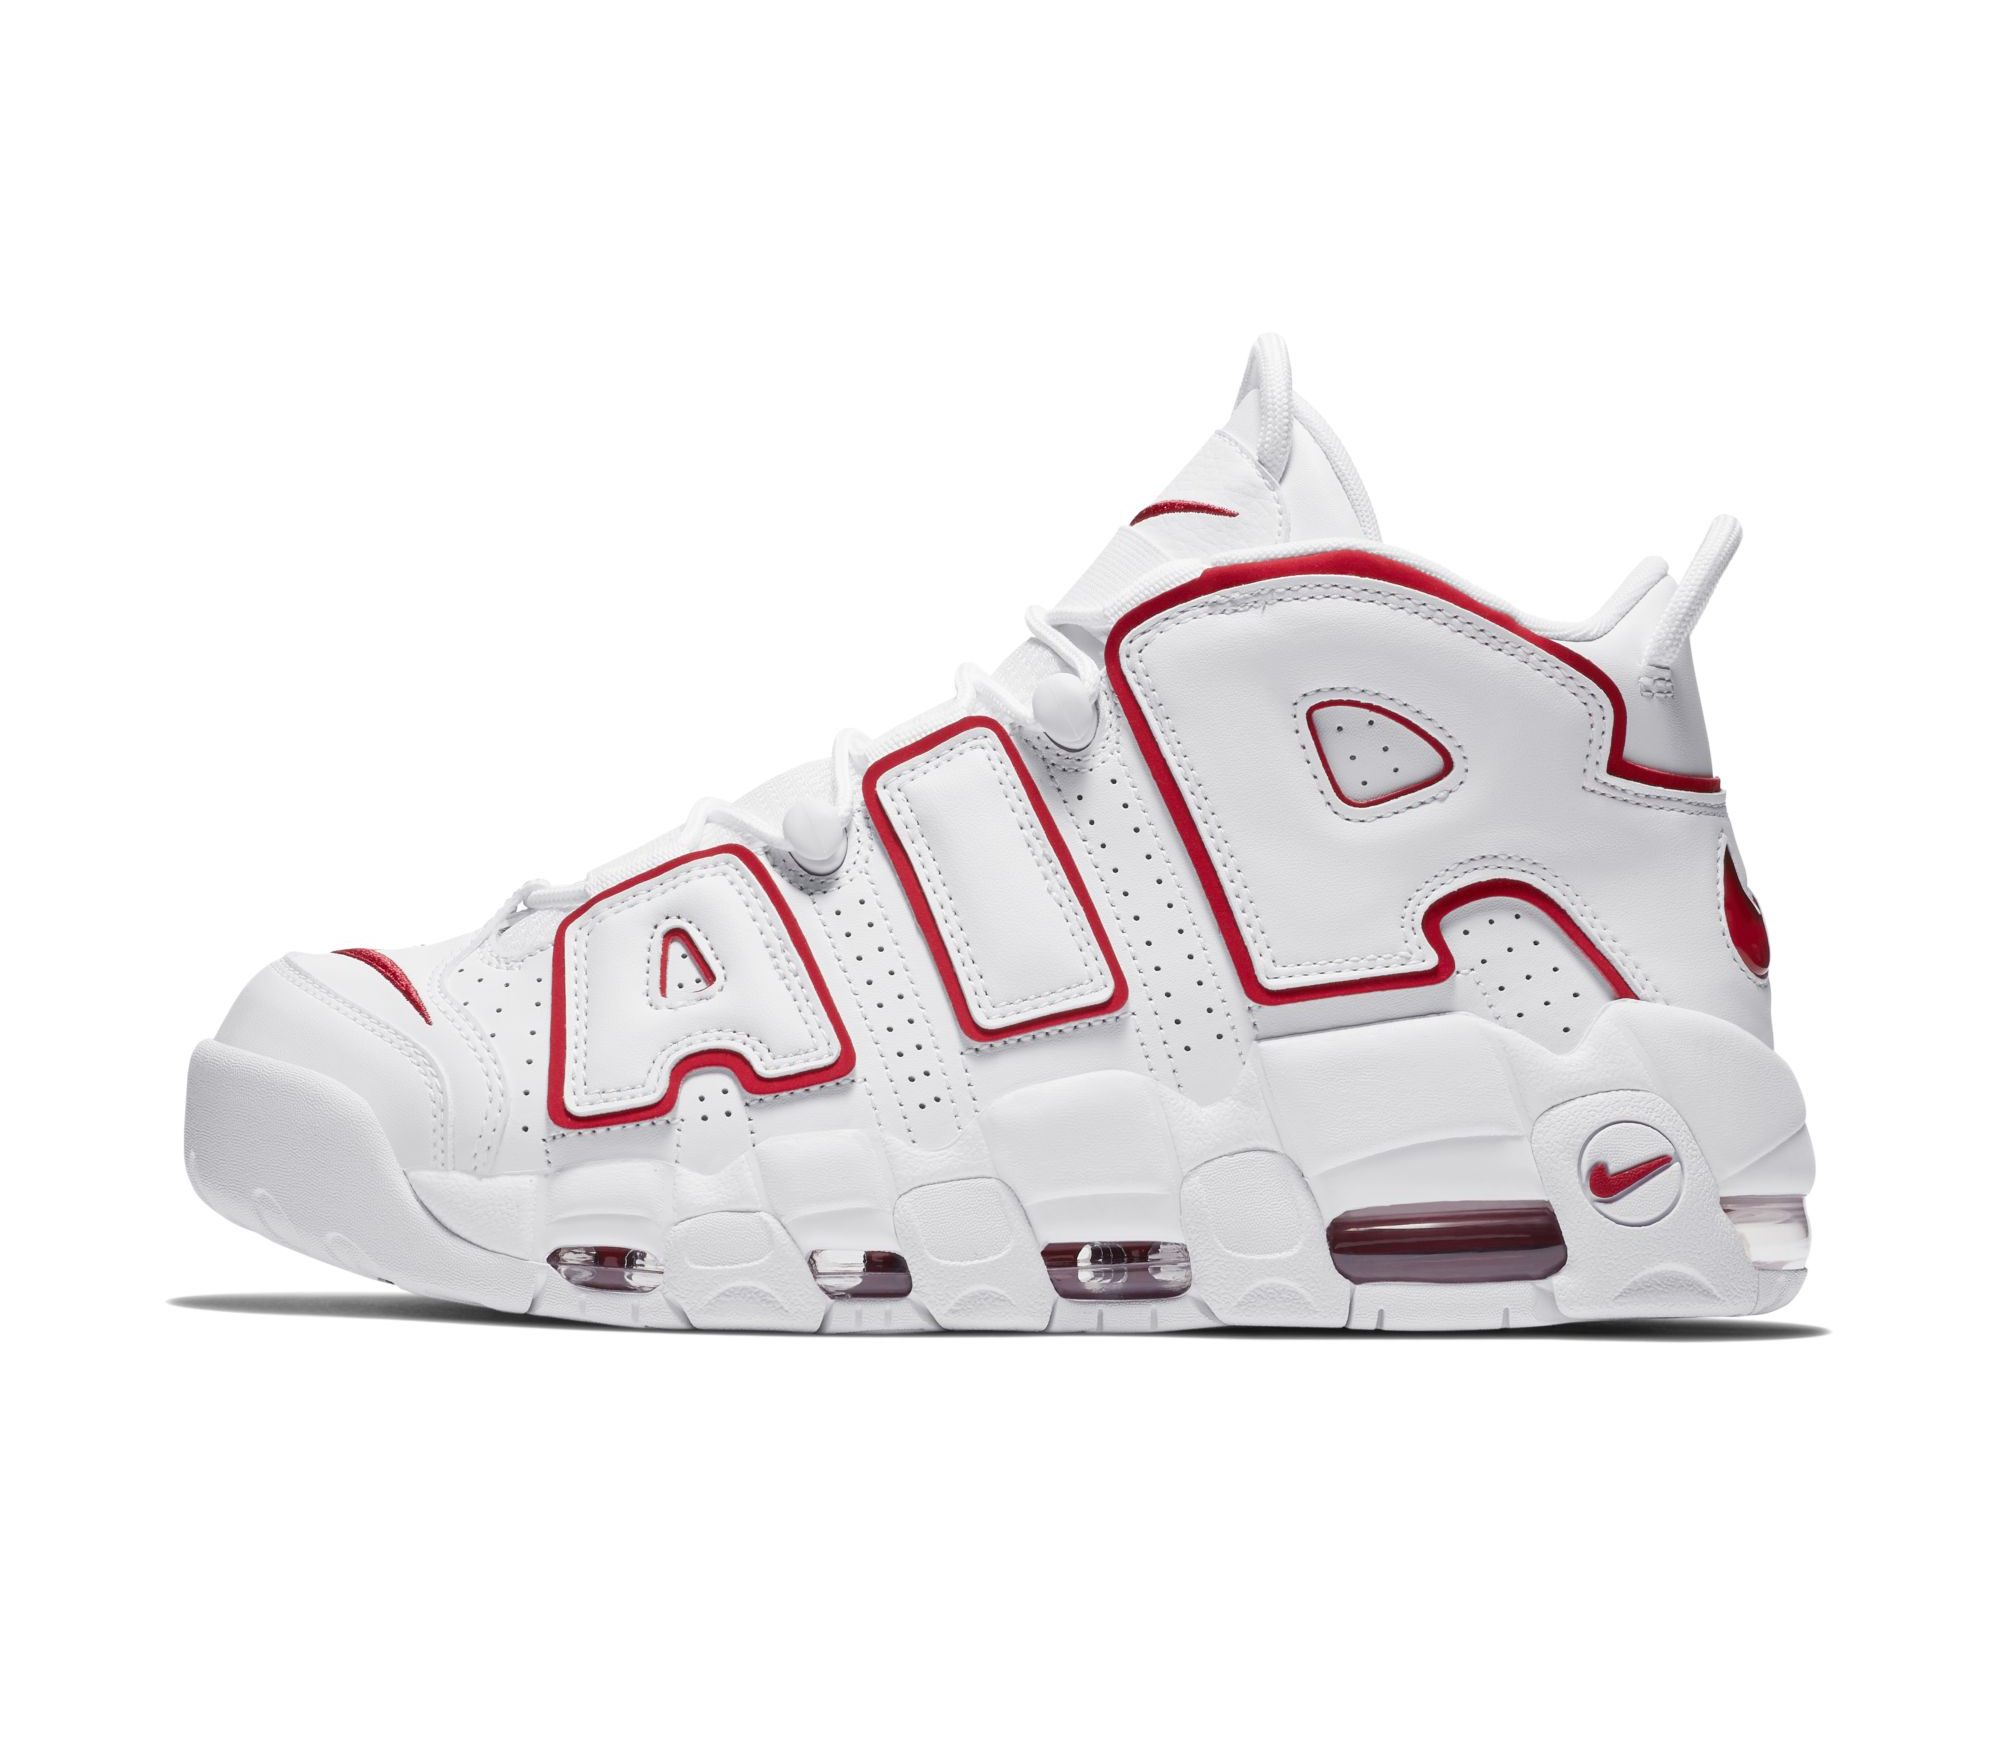 How The Nike Air More Uptempo Varsity Red Looks On-Feet